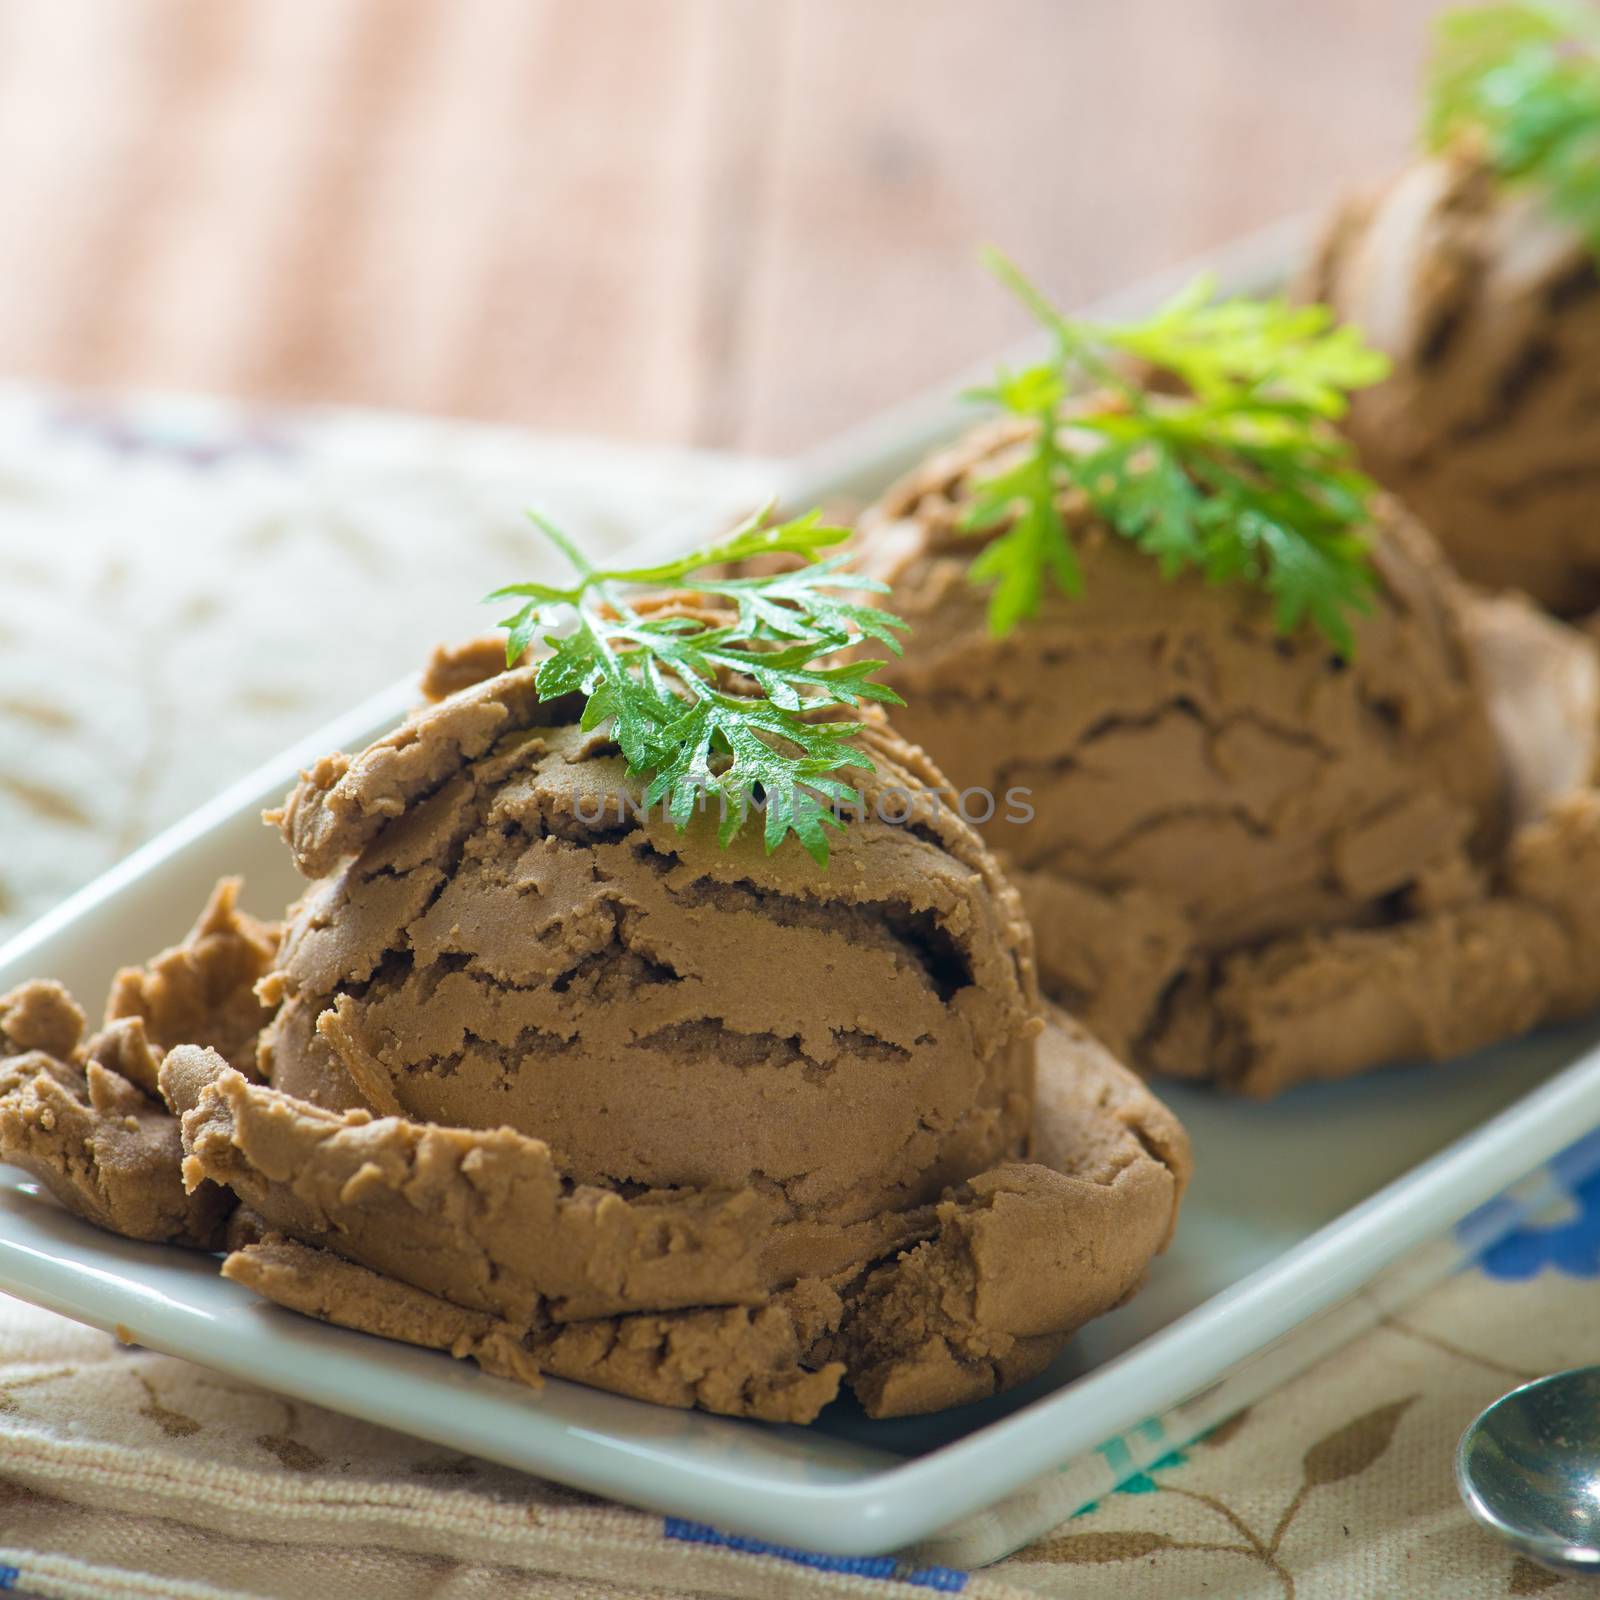 Brown ice cream in plate on dining table background.